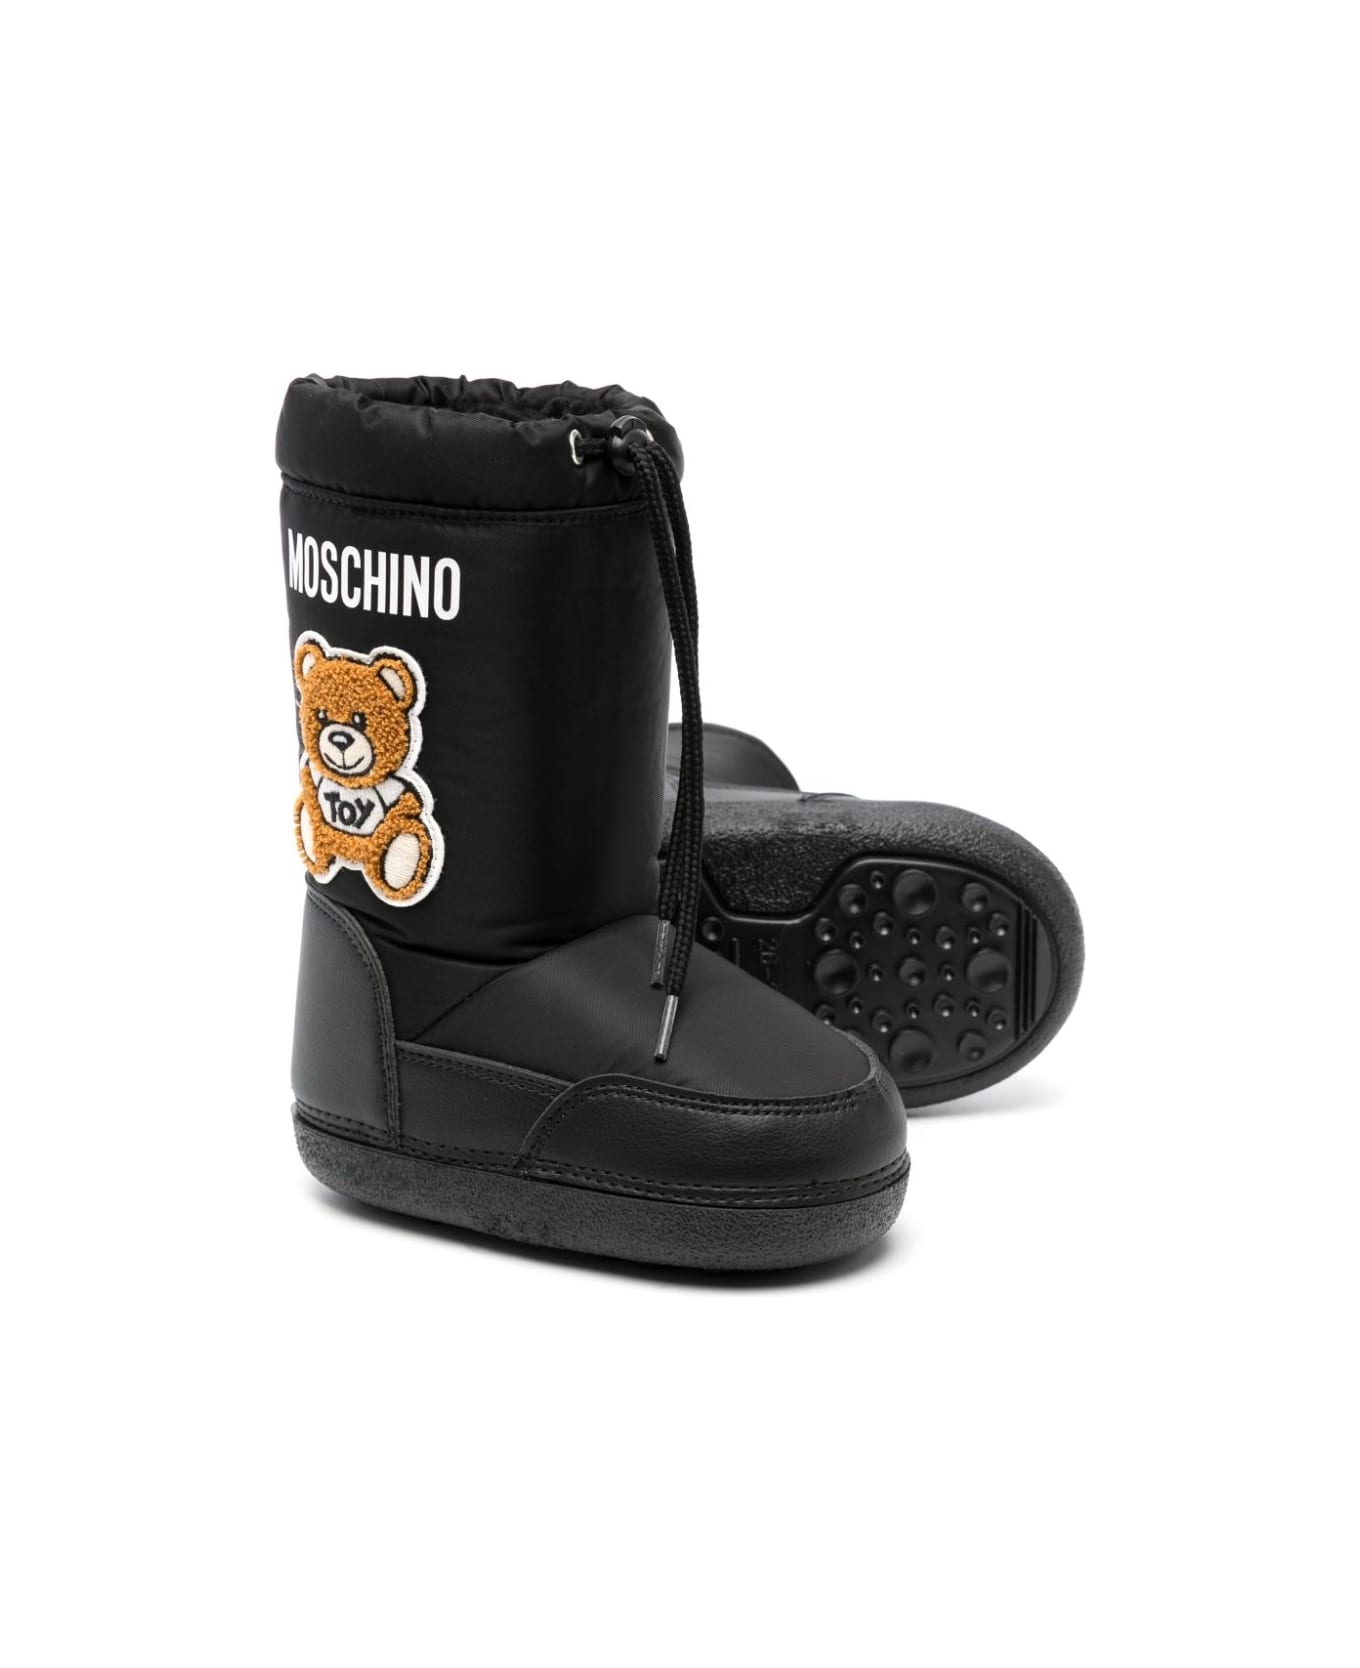 Moschino Teddy Bear Patch Snow Boots - Black